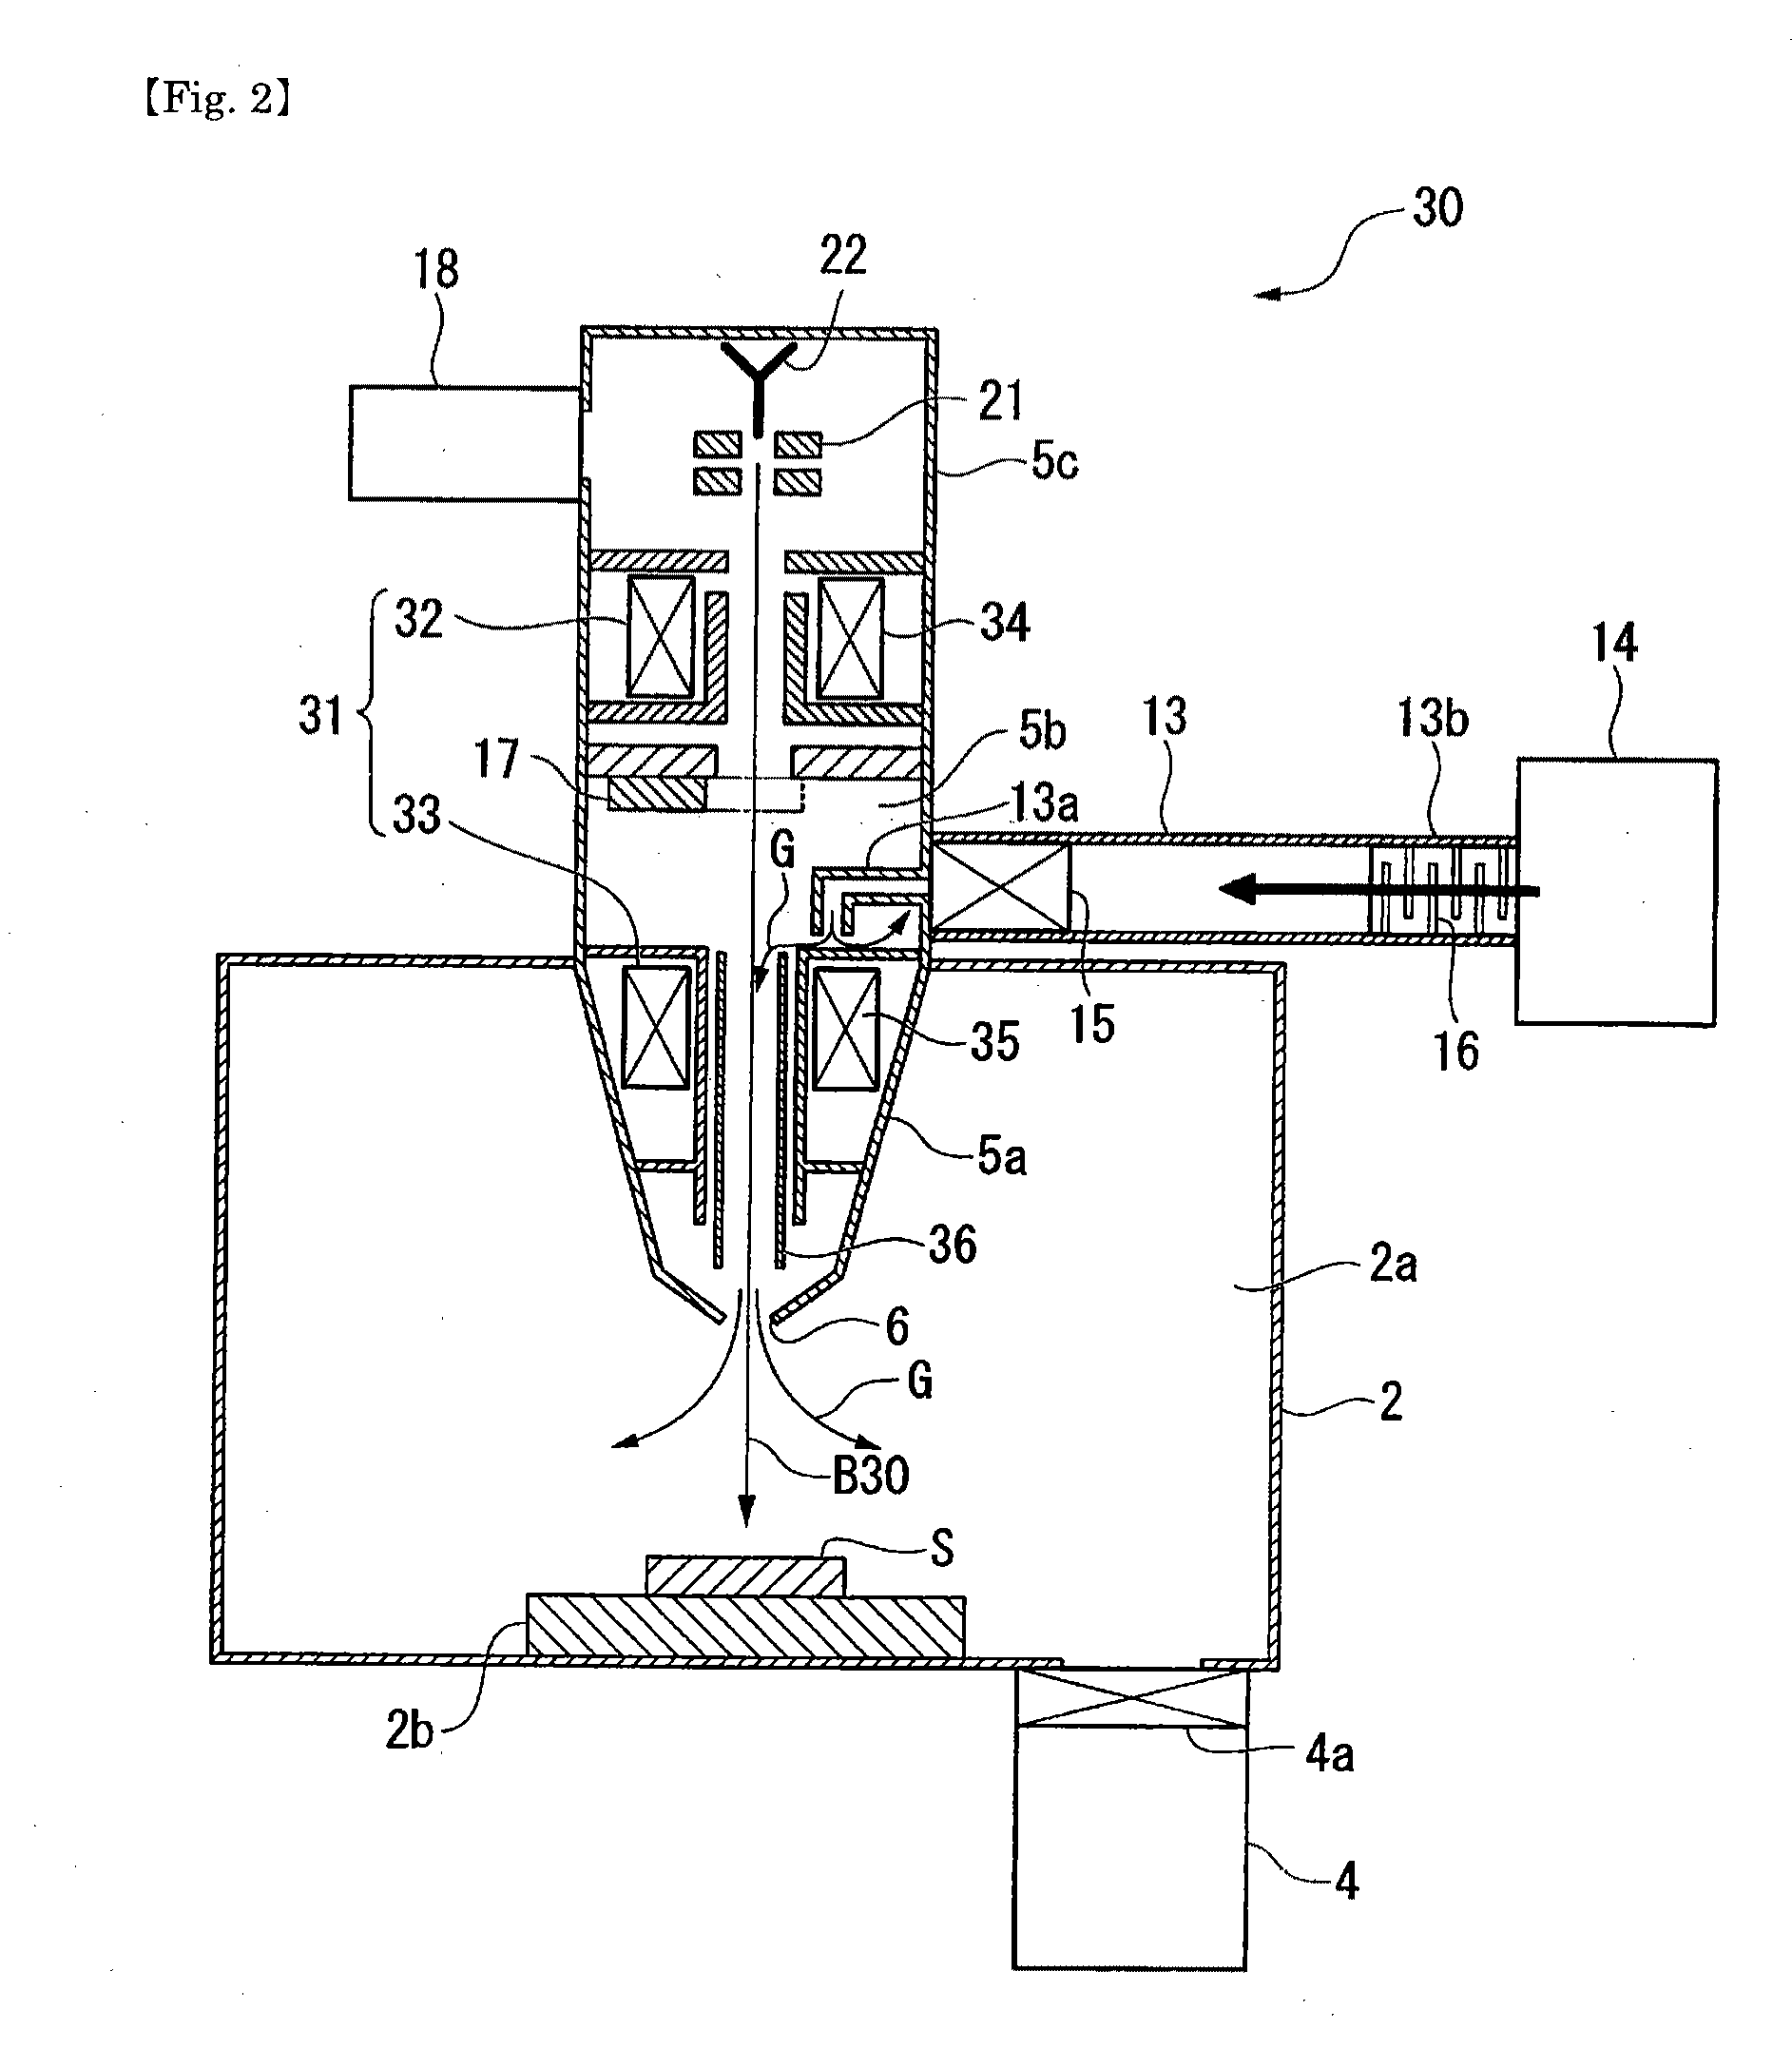 Charged-particle beam apparatus